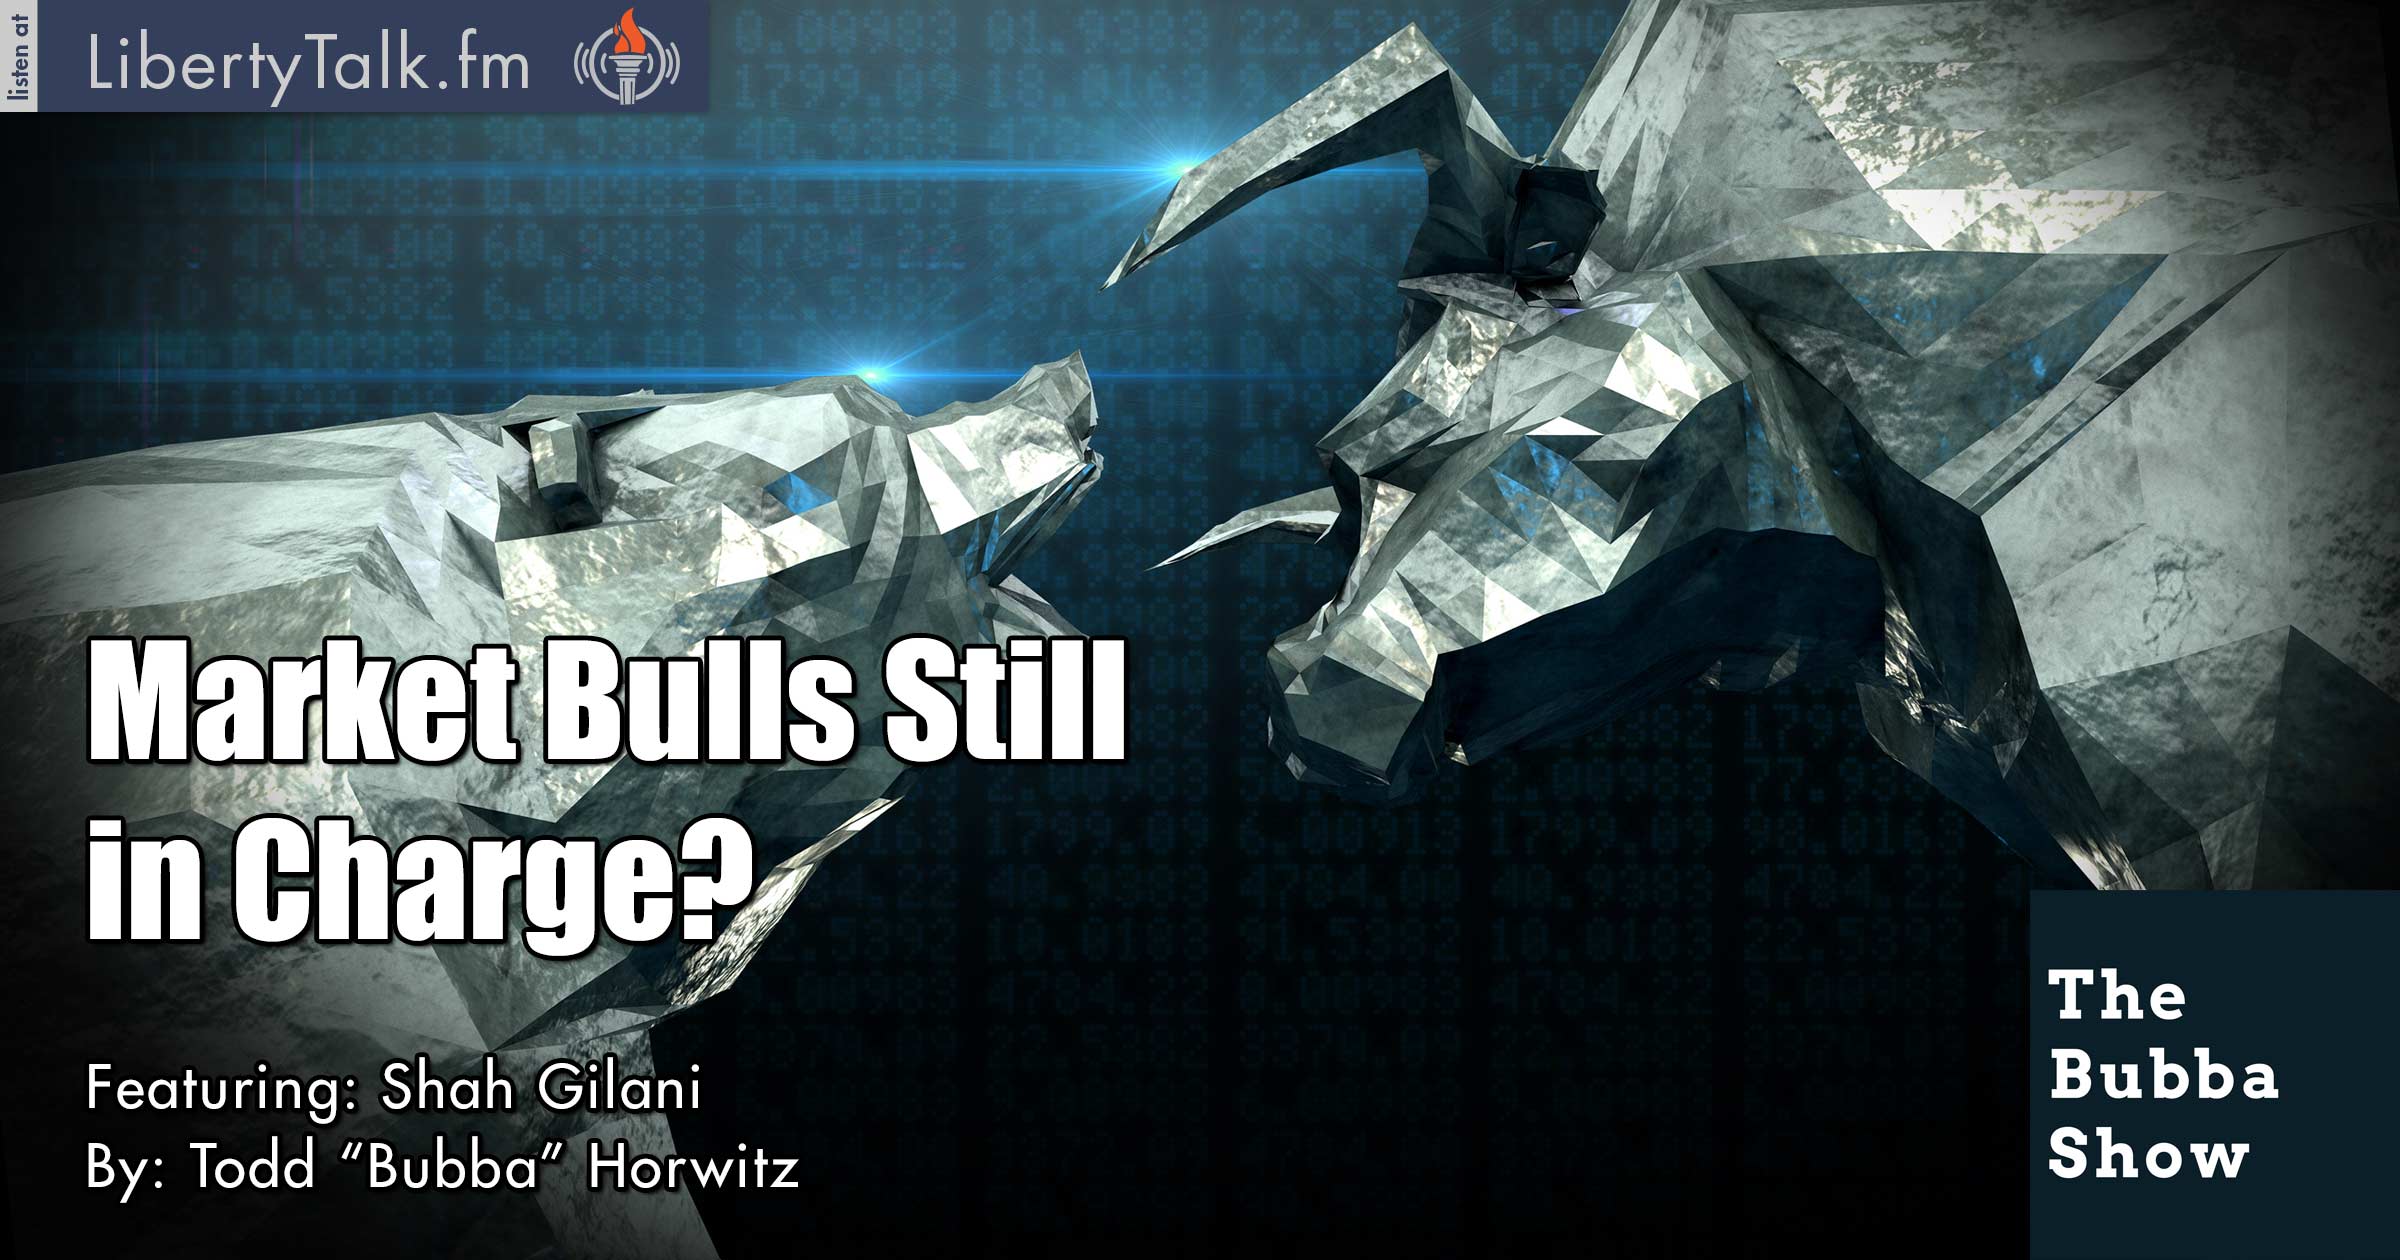 Market Bulls Still in Charge? - The Bubba Show